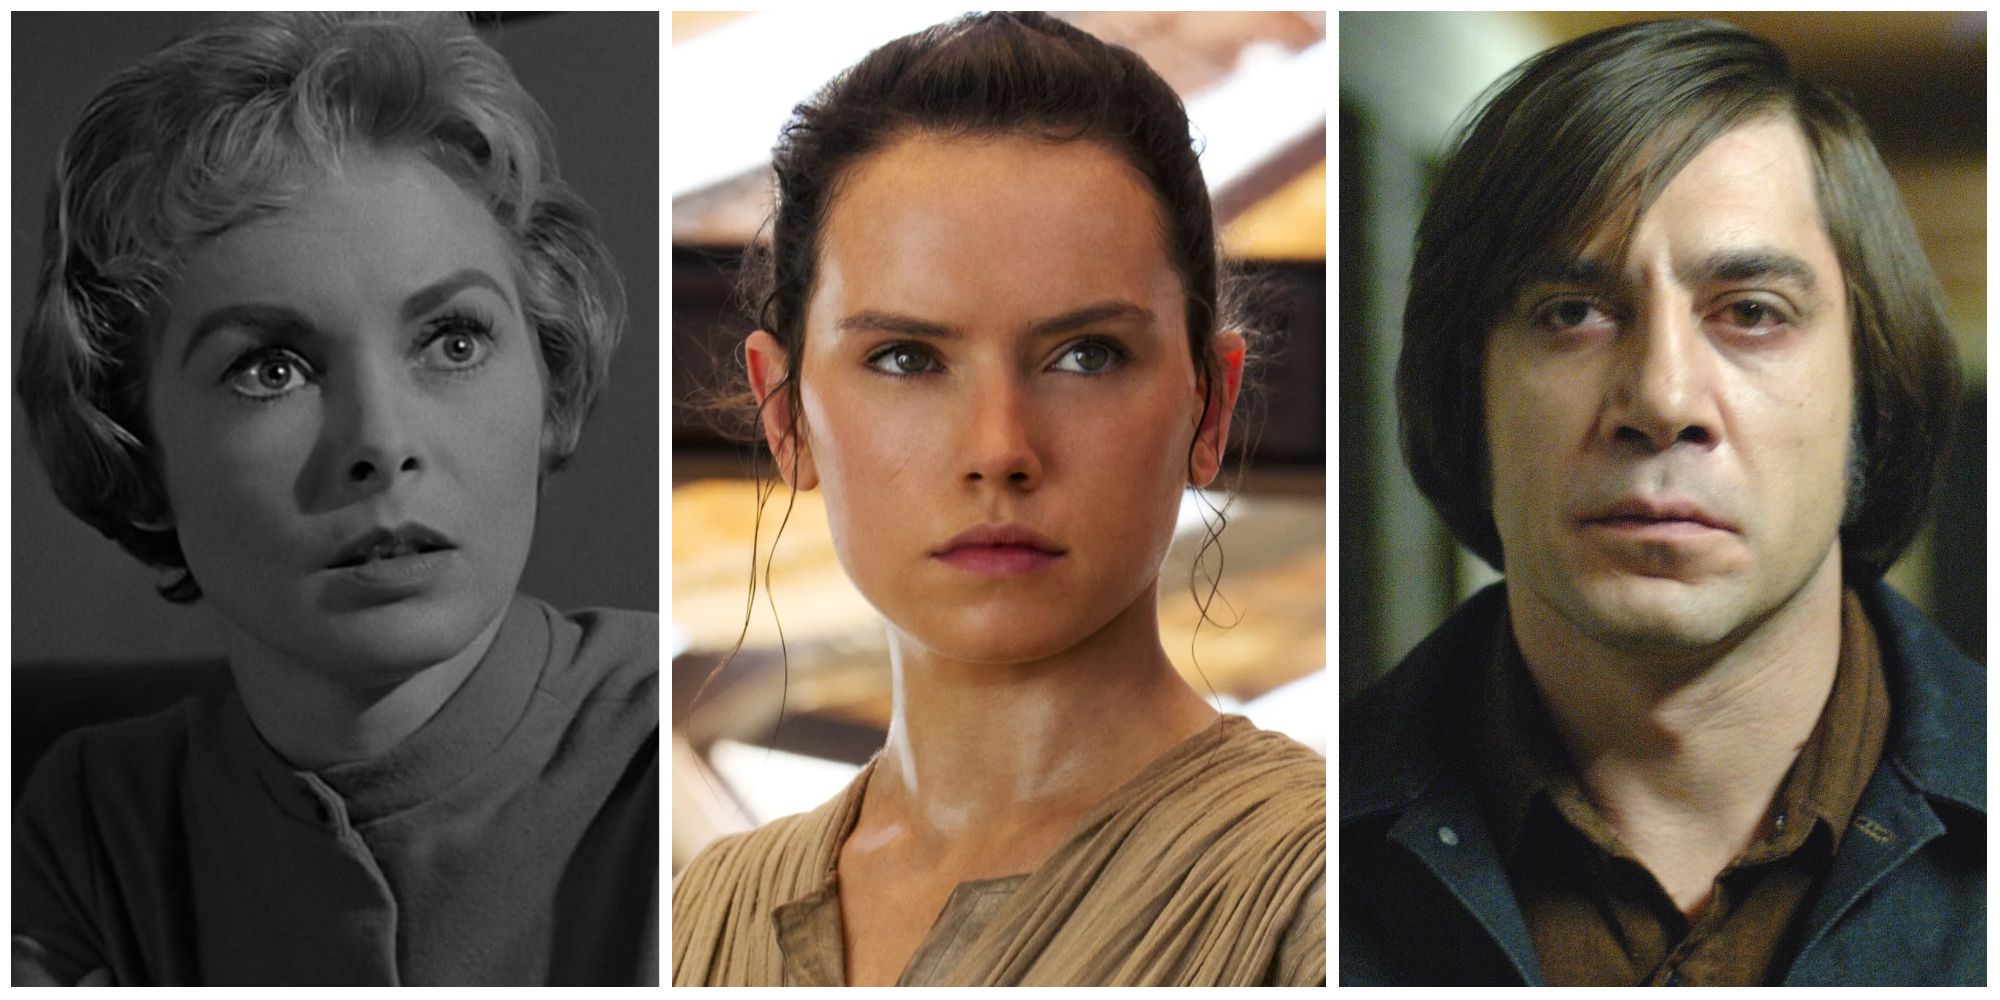 Psycho, Star Wars: The Force Awakens, and No Country for Old Men